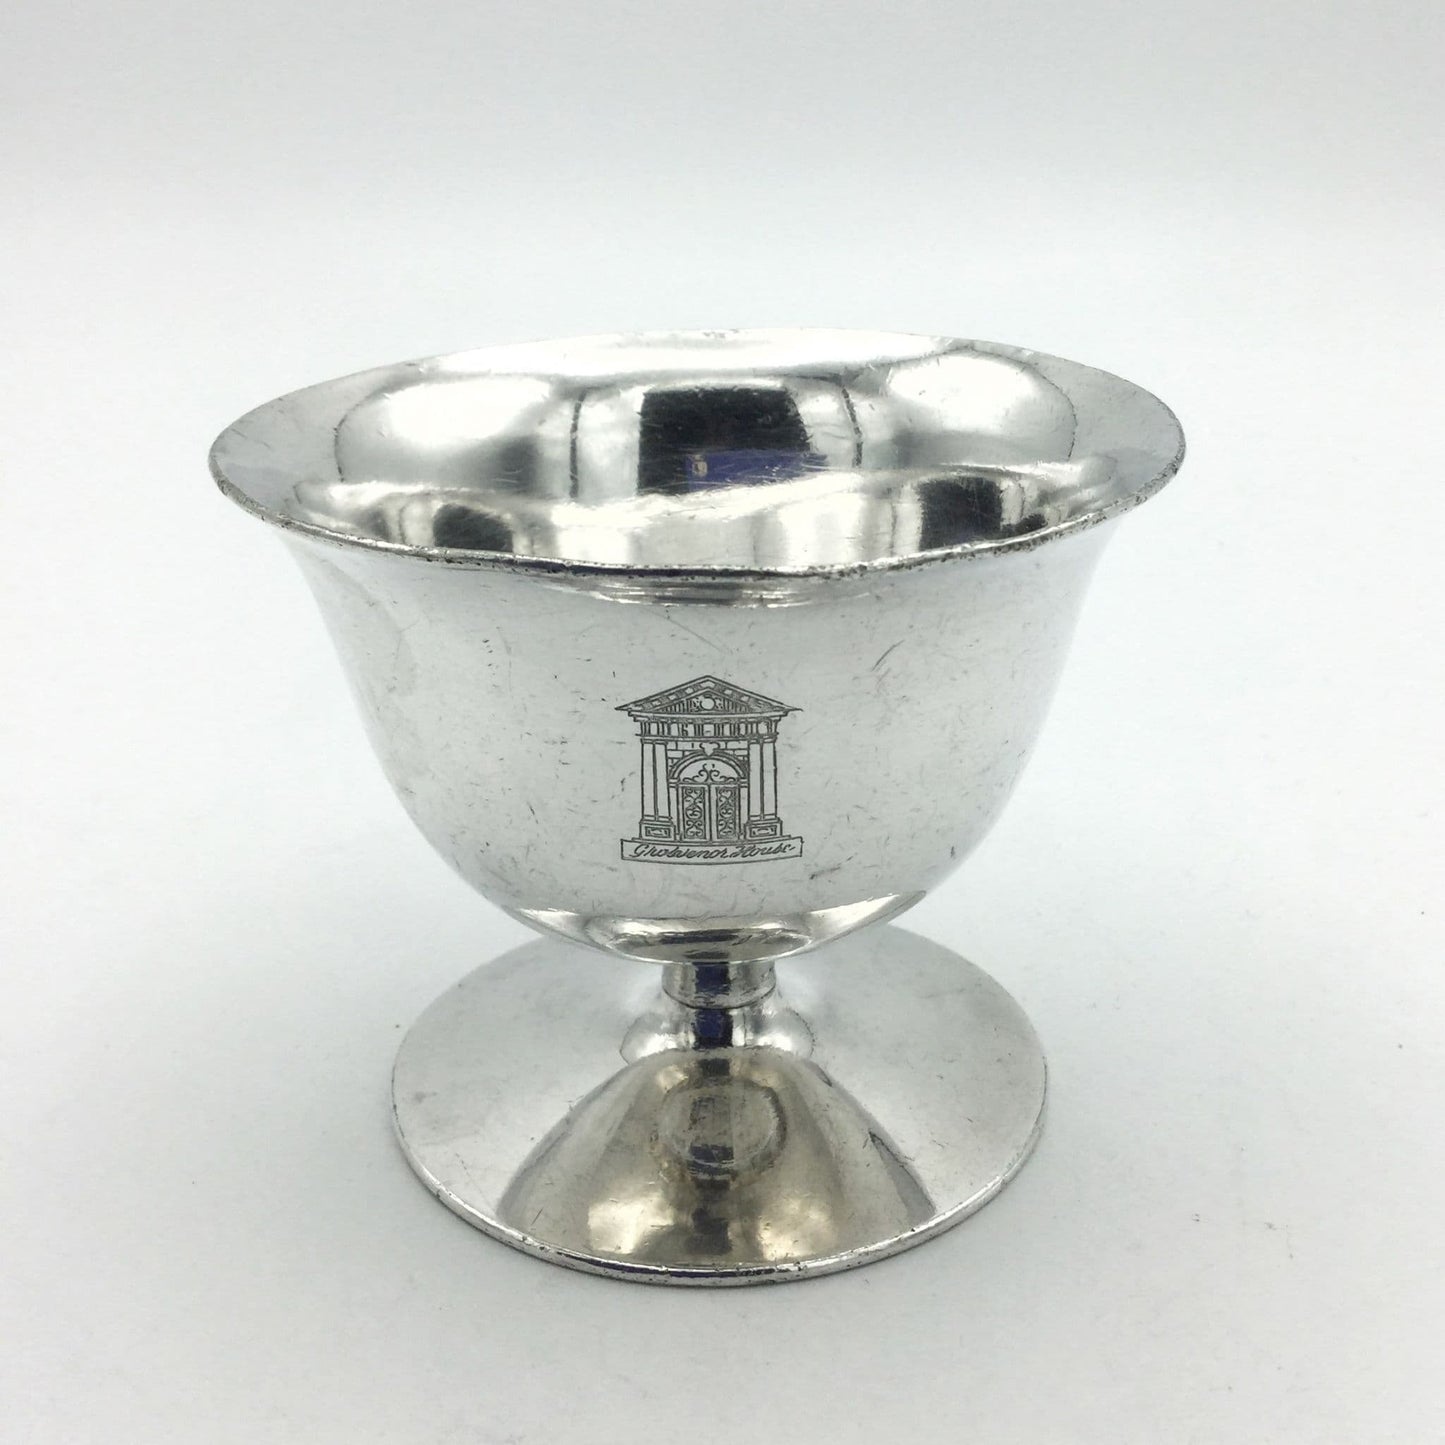 Vintage 1930s Mappin & Webb Silver Plated Wine Goblet/ Chalice, Grosvenor House